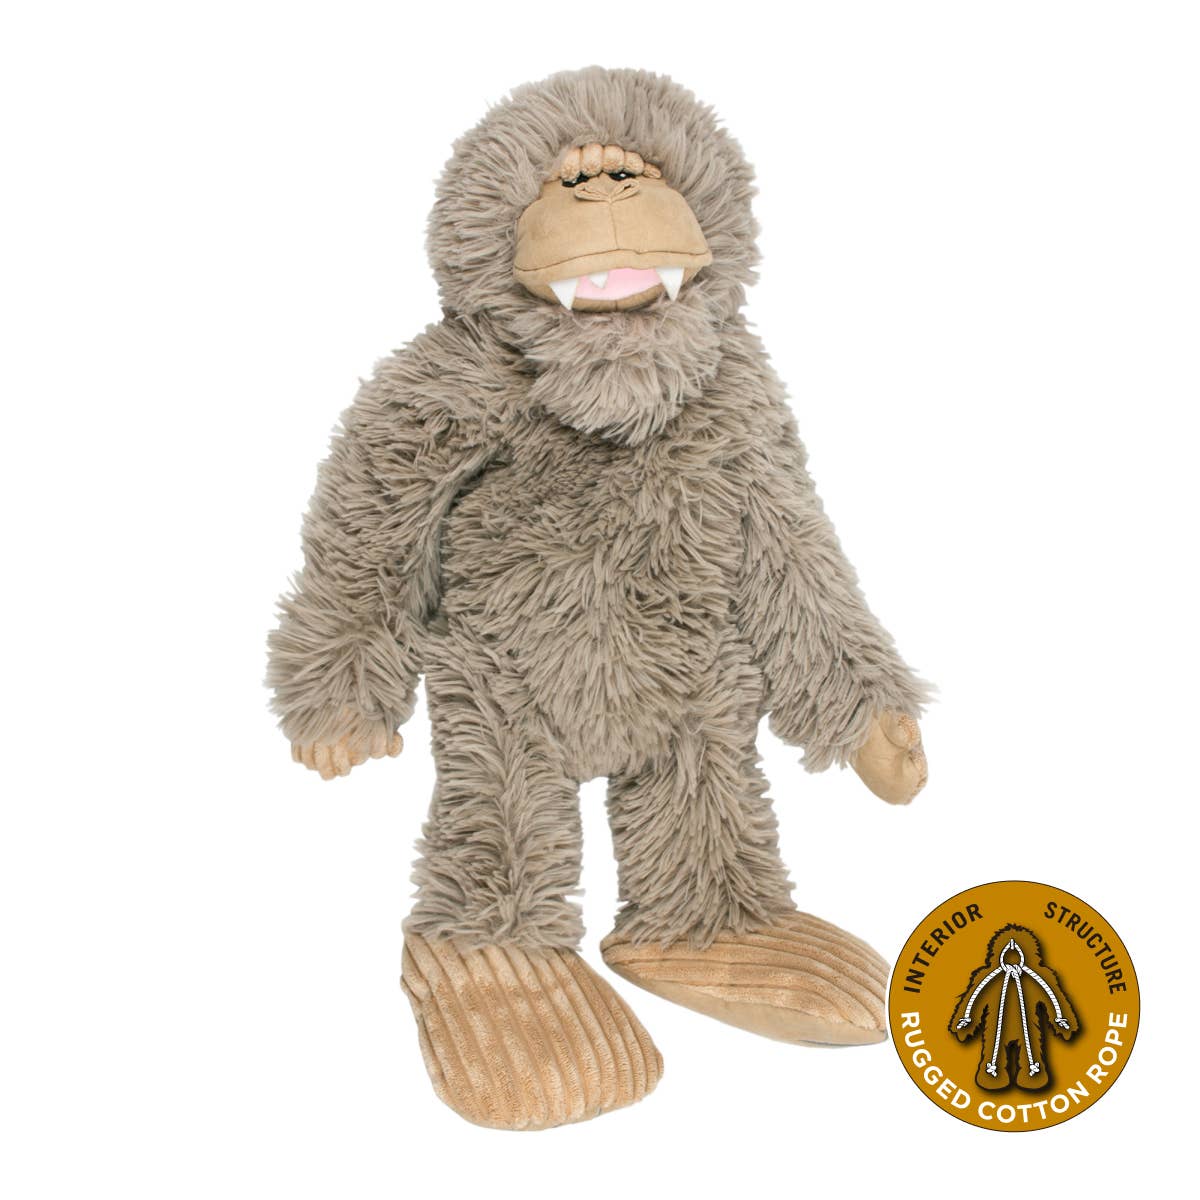 Tall Tails - 20" Stuffless Big Foot with Squeaker